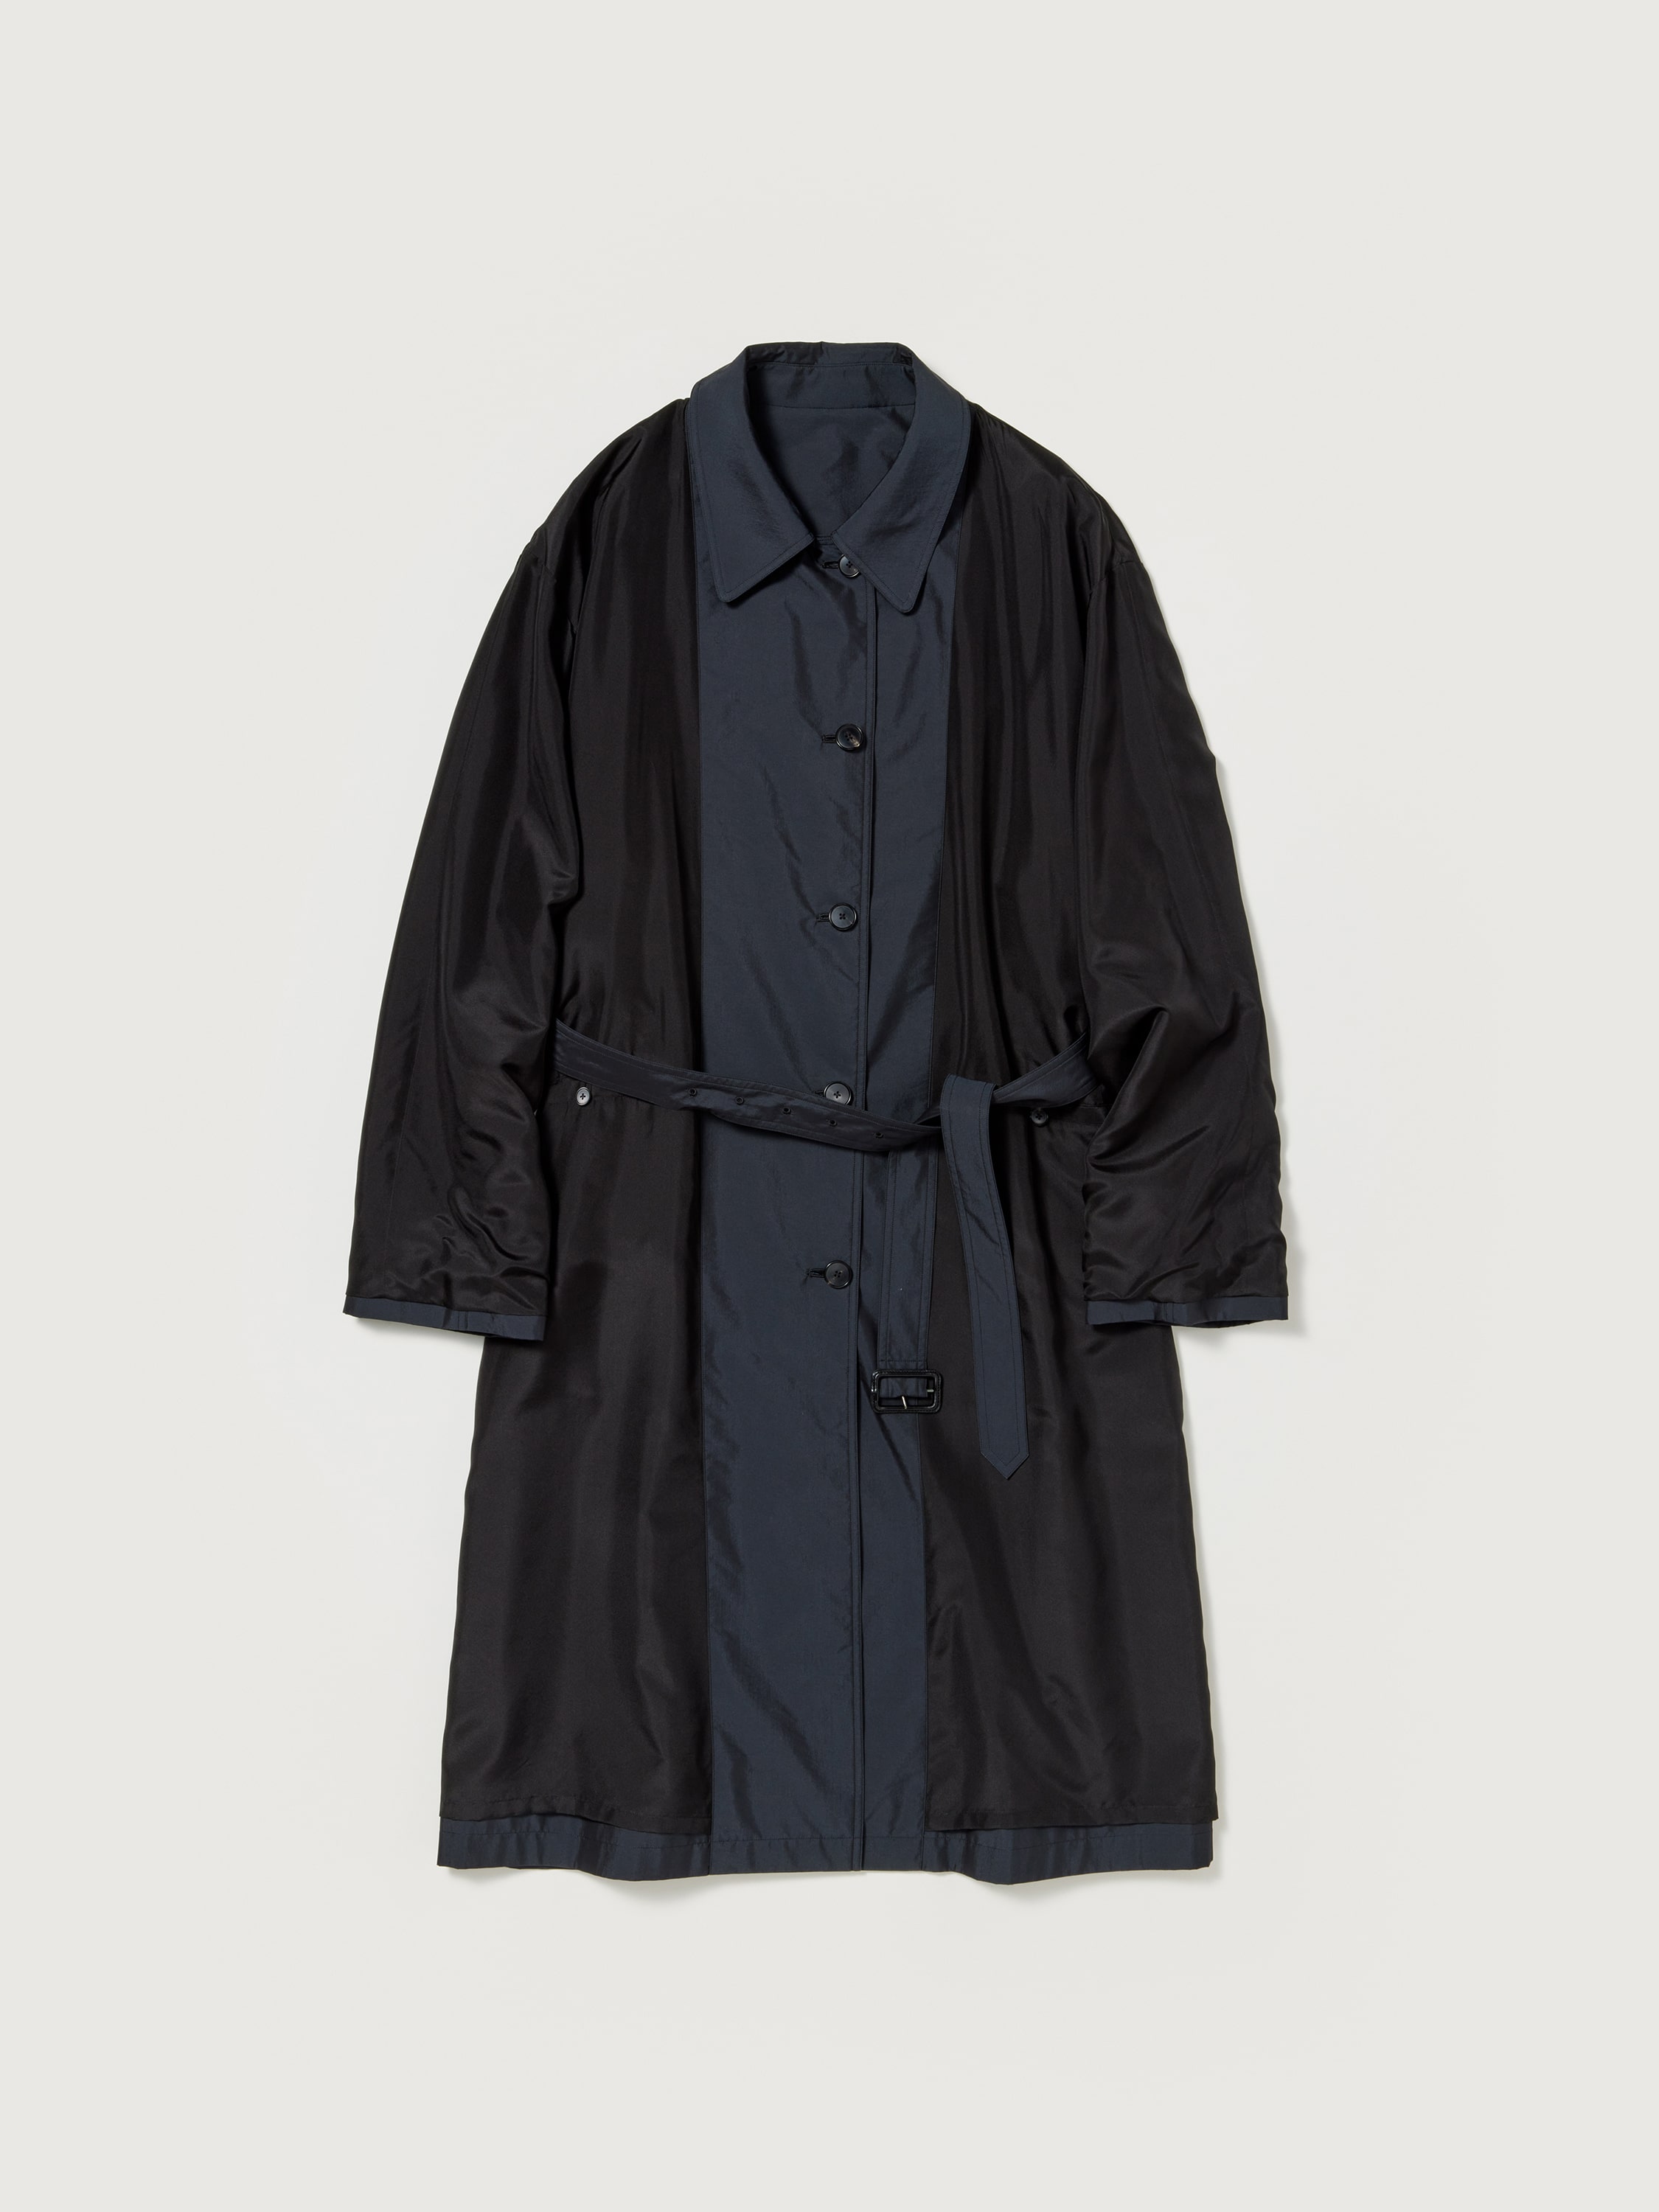 FINX POLYESTER WEATHER CHAMBRAY SOUTIEN COLLOAR COAT 詳細画像 BLACK CHAMBRAY 2